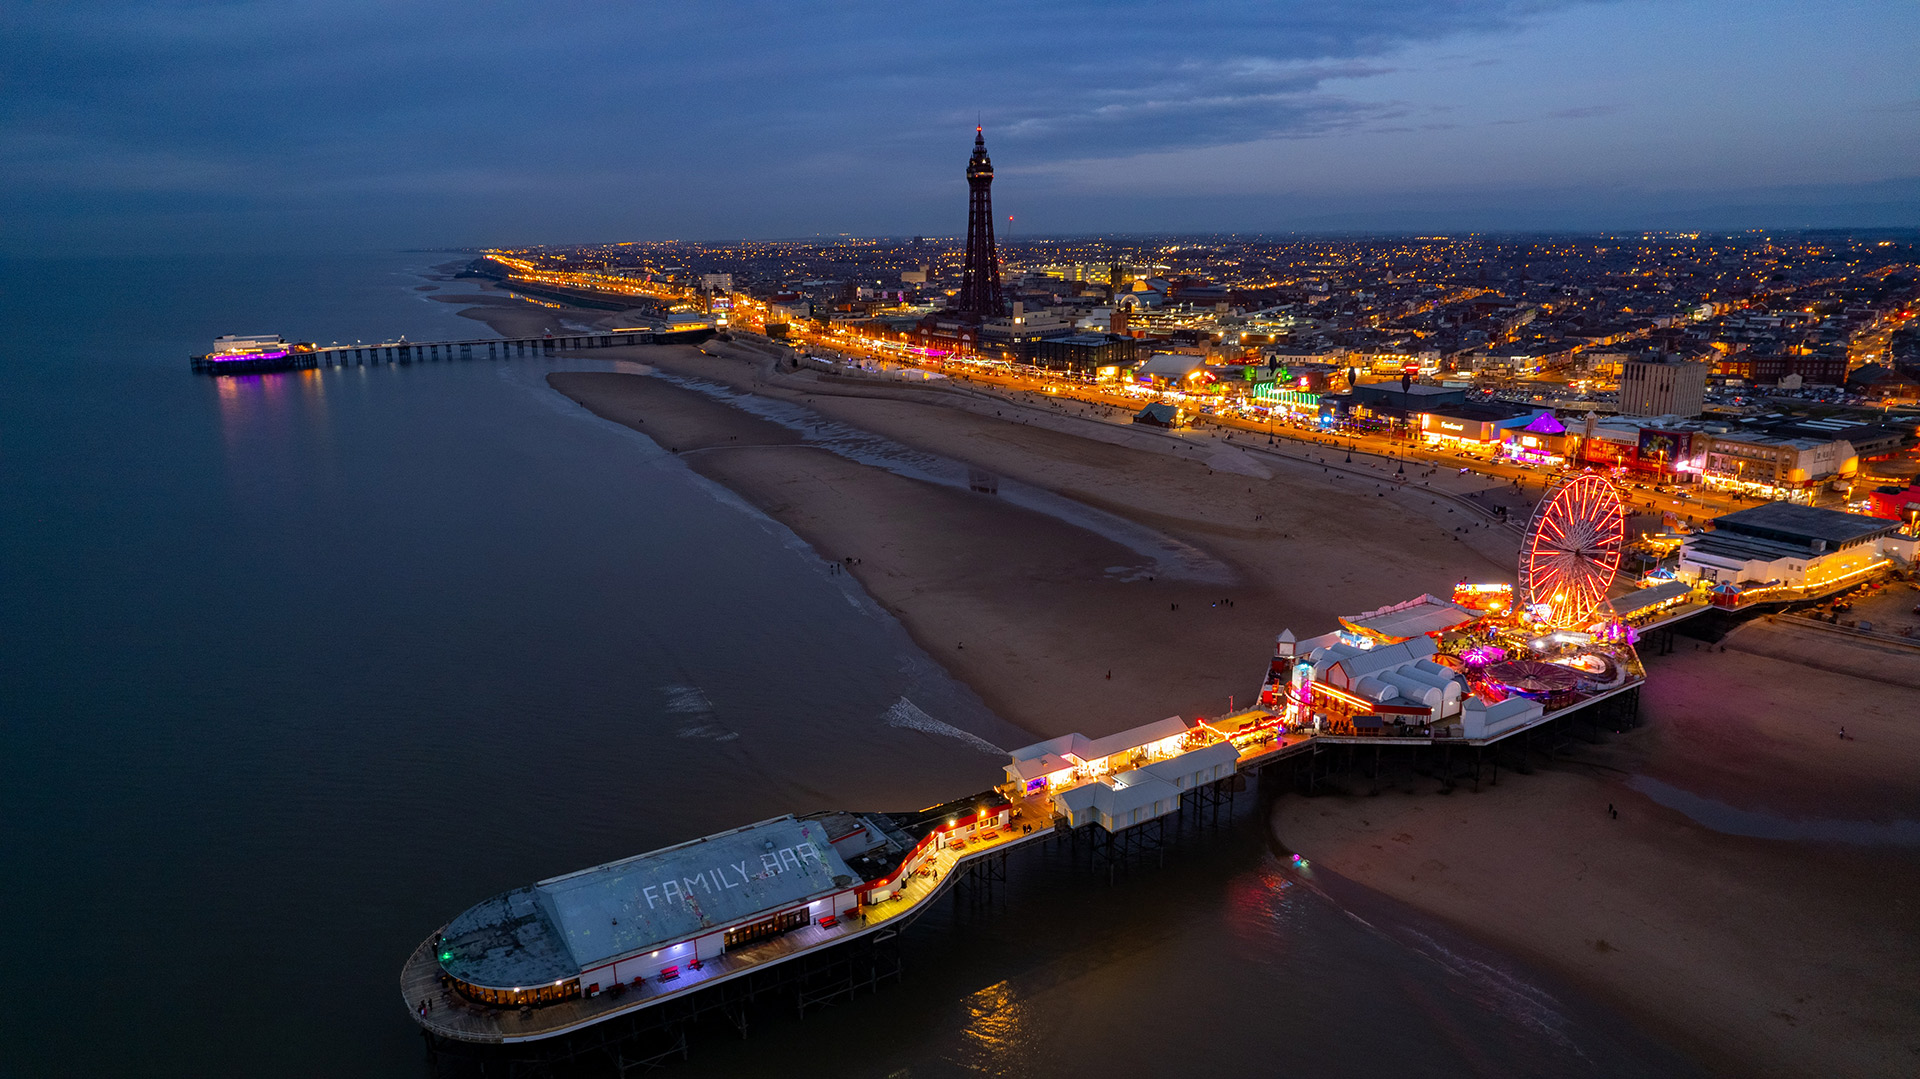 blackpool tourism facts